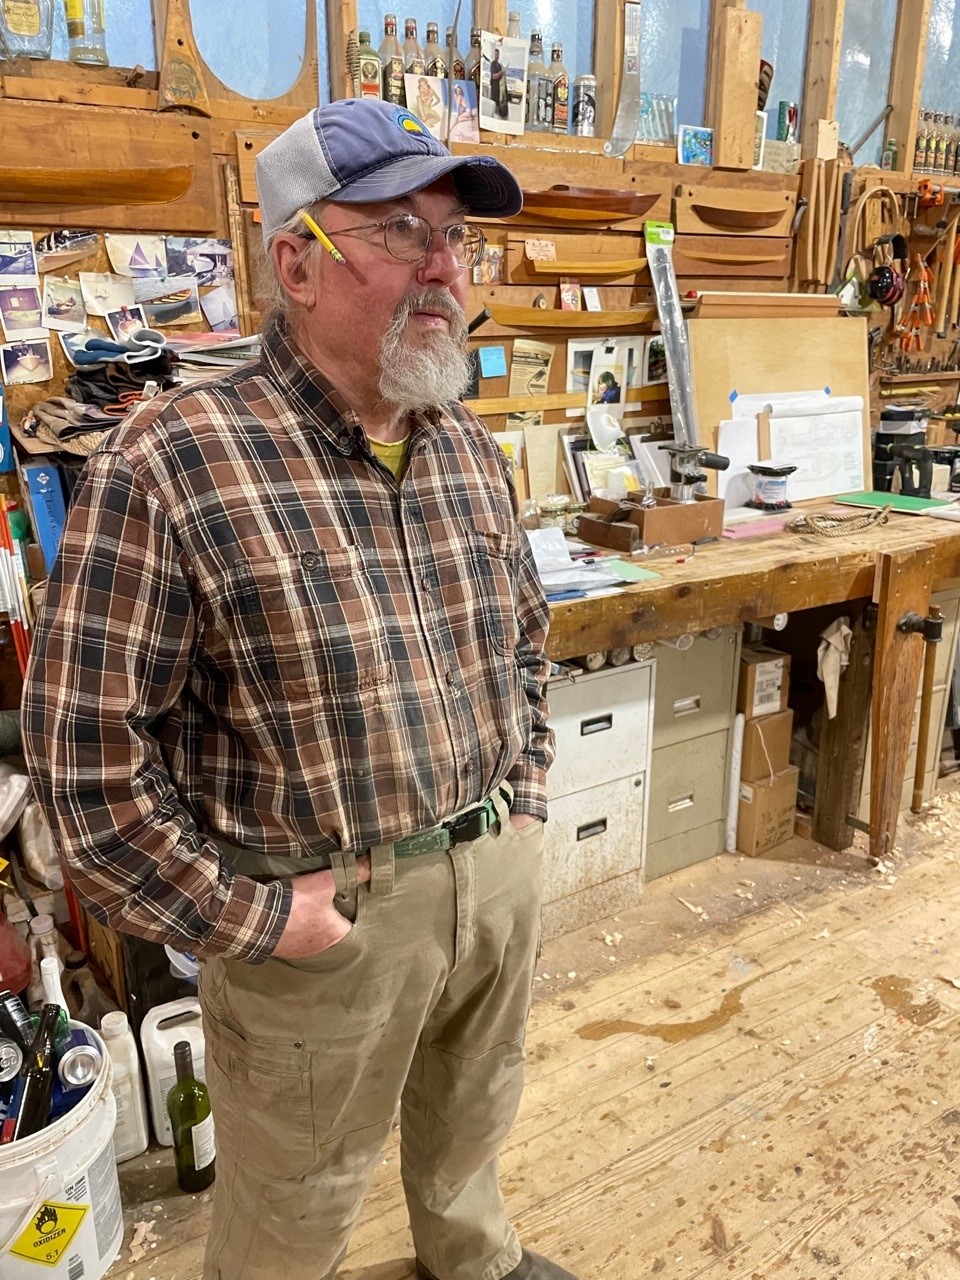 Walter Baron’s boatbuilding is ‘a niche within a niche’